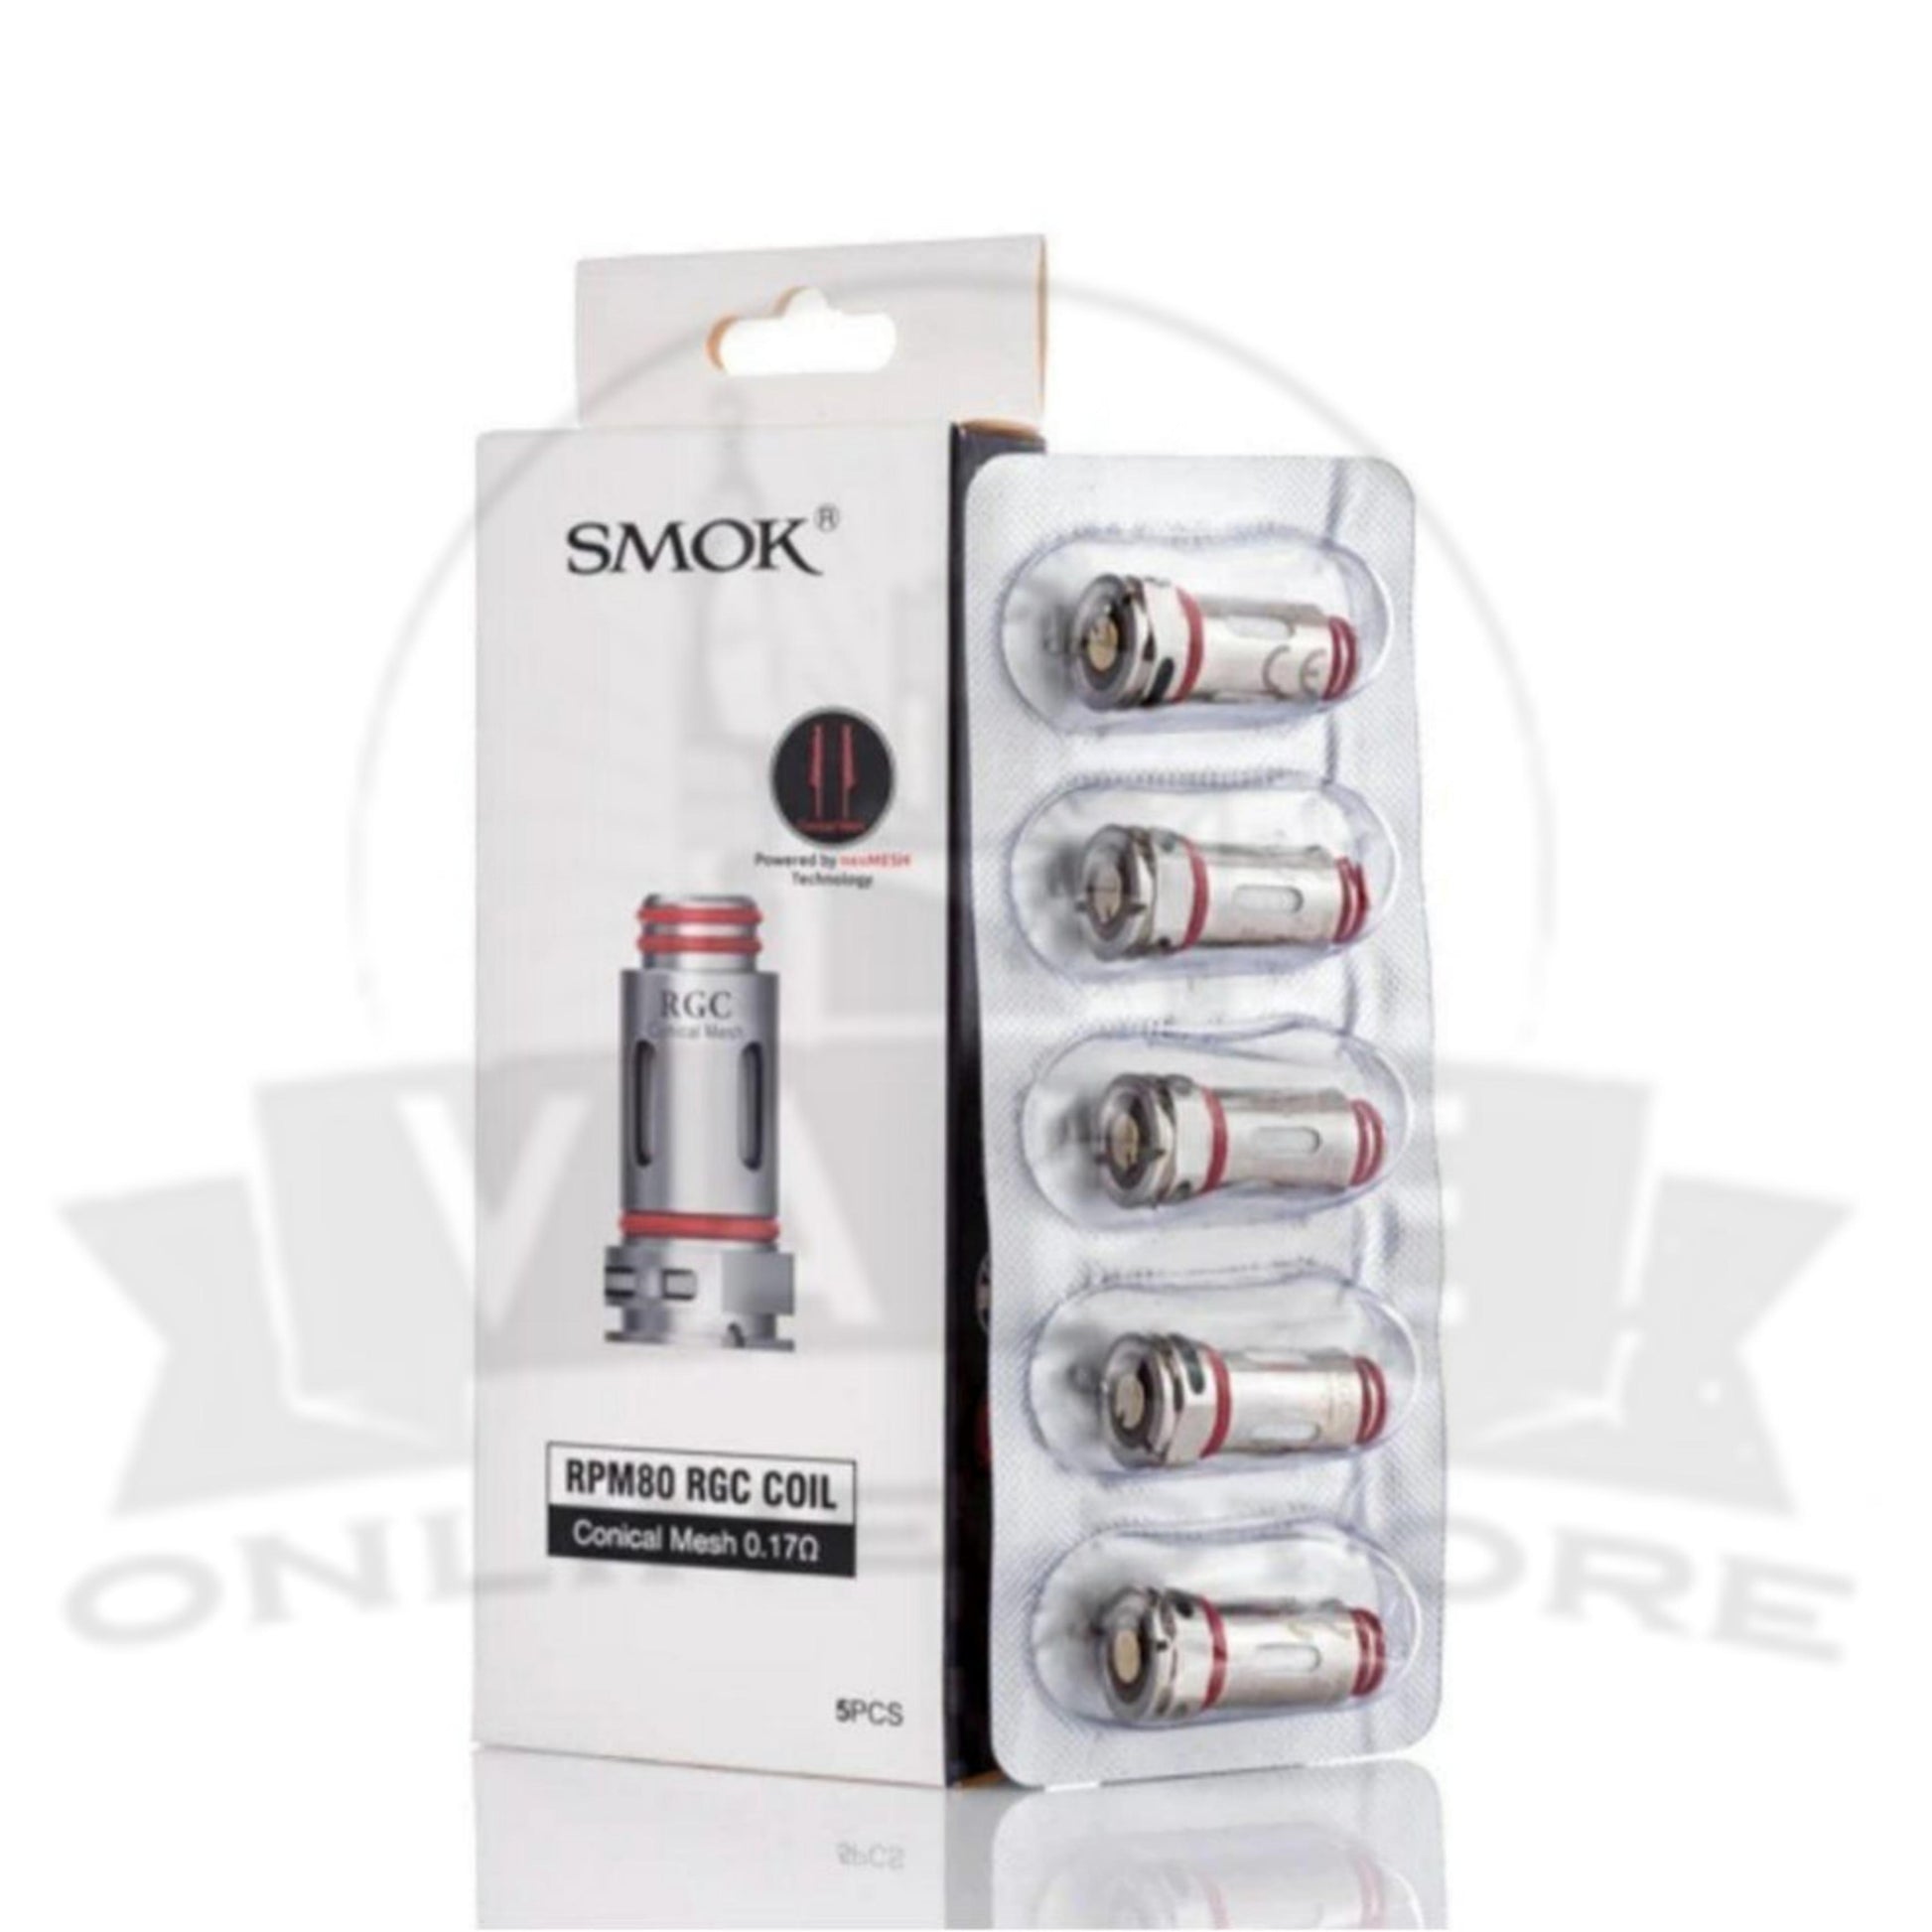 SMOK RGC Replacement Coils | Pack Of 5